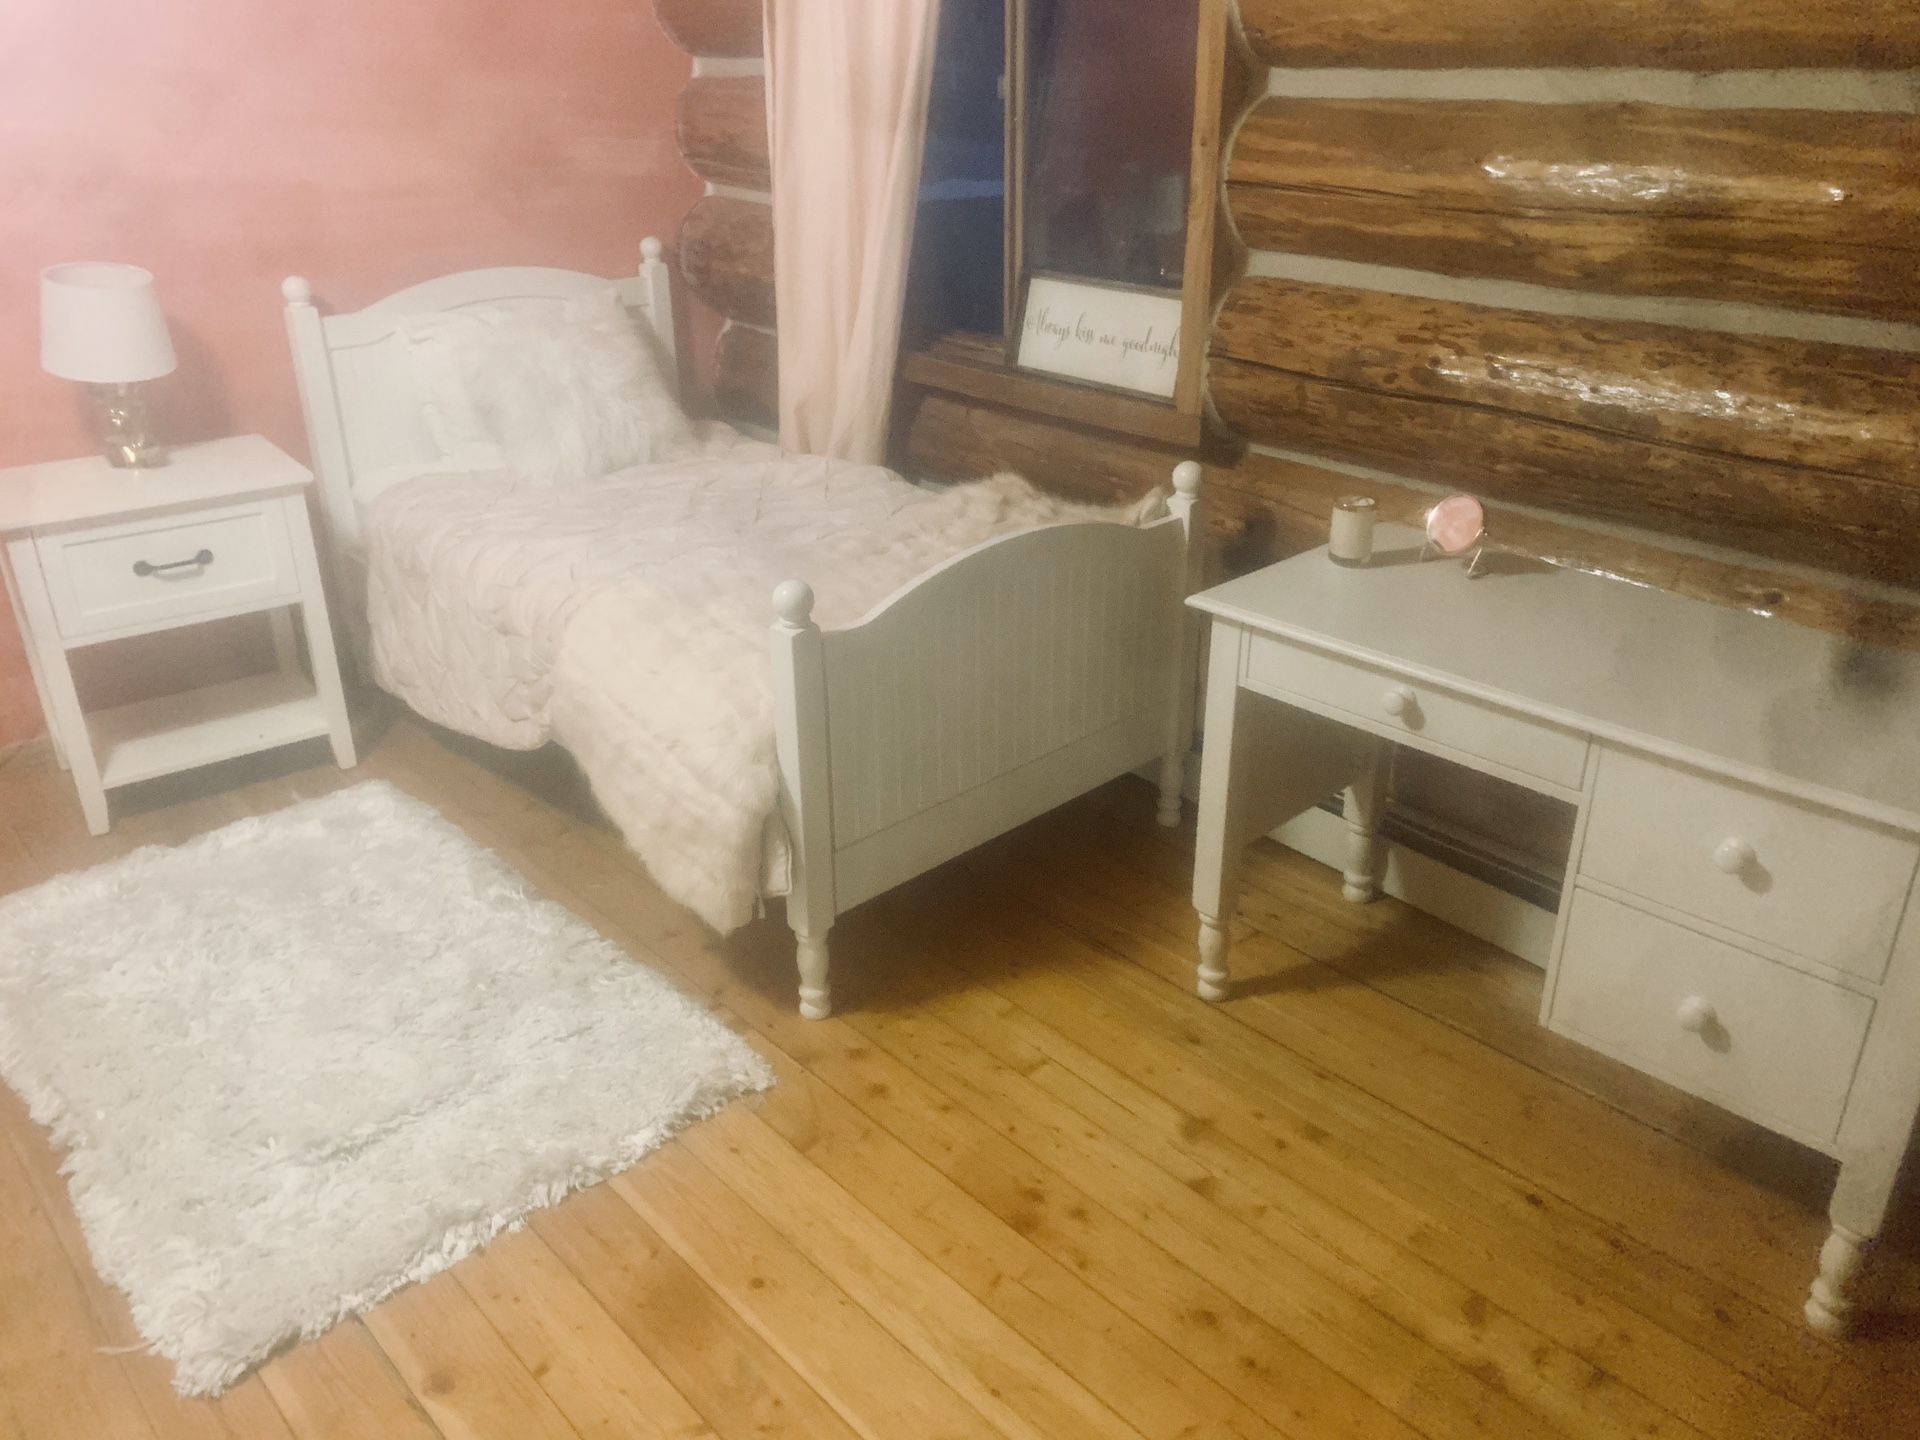 Potery Barn girl bedroom set , includes desk. Barely used.. mattress not included.